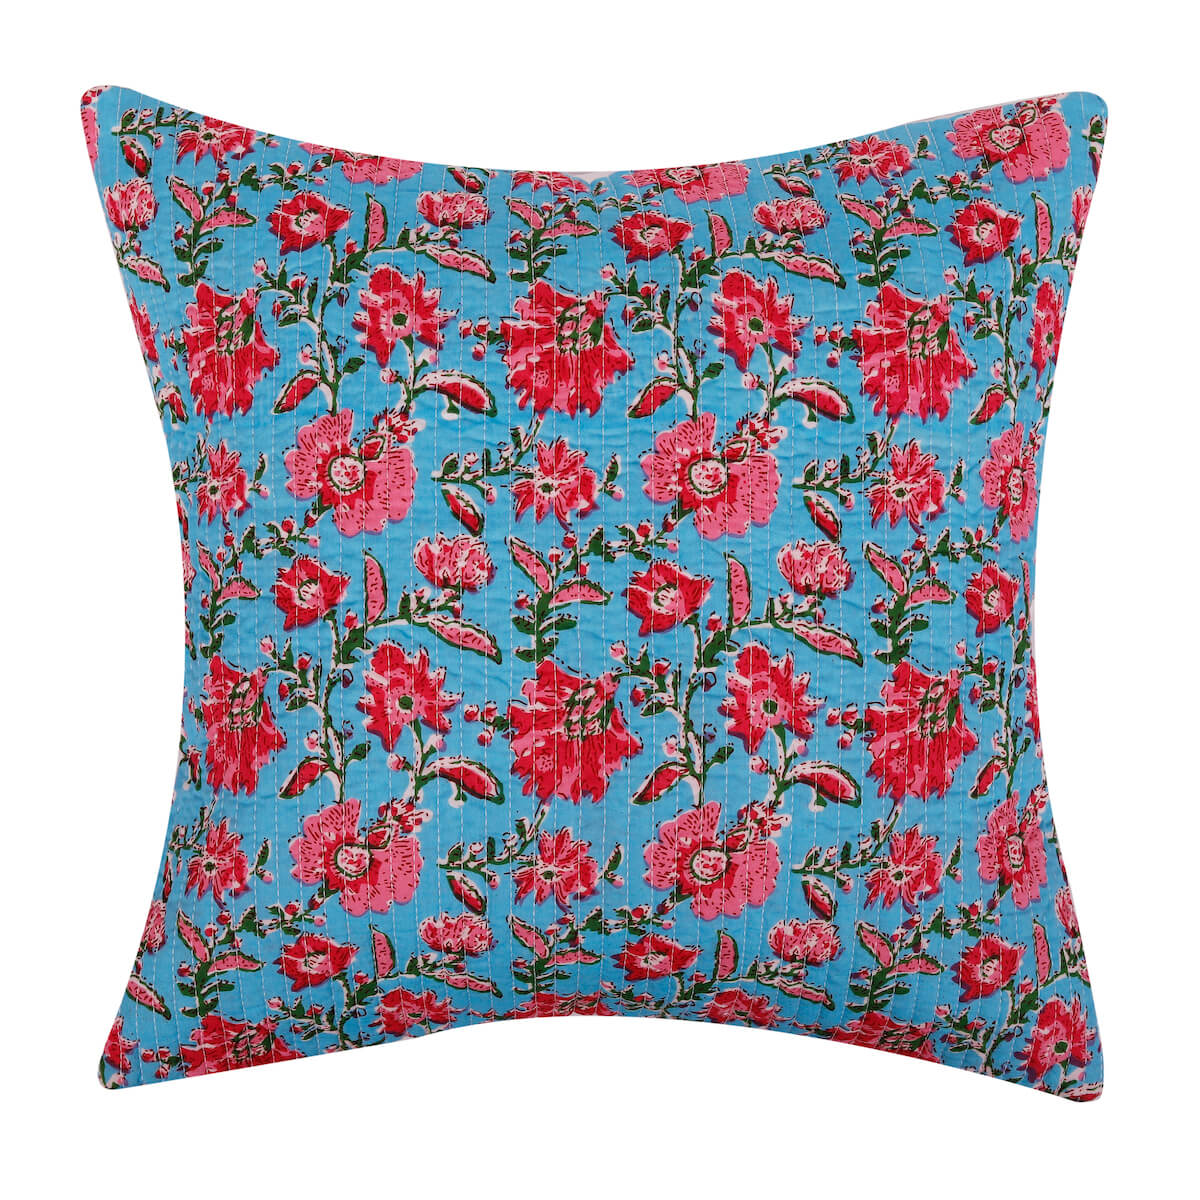 Jaipur Hand Block Print Pink Wild Flowers Quilted Blue Colour Cotton Cushion Cover - 16"x16" Size